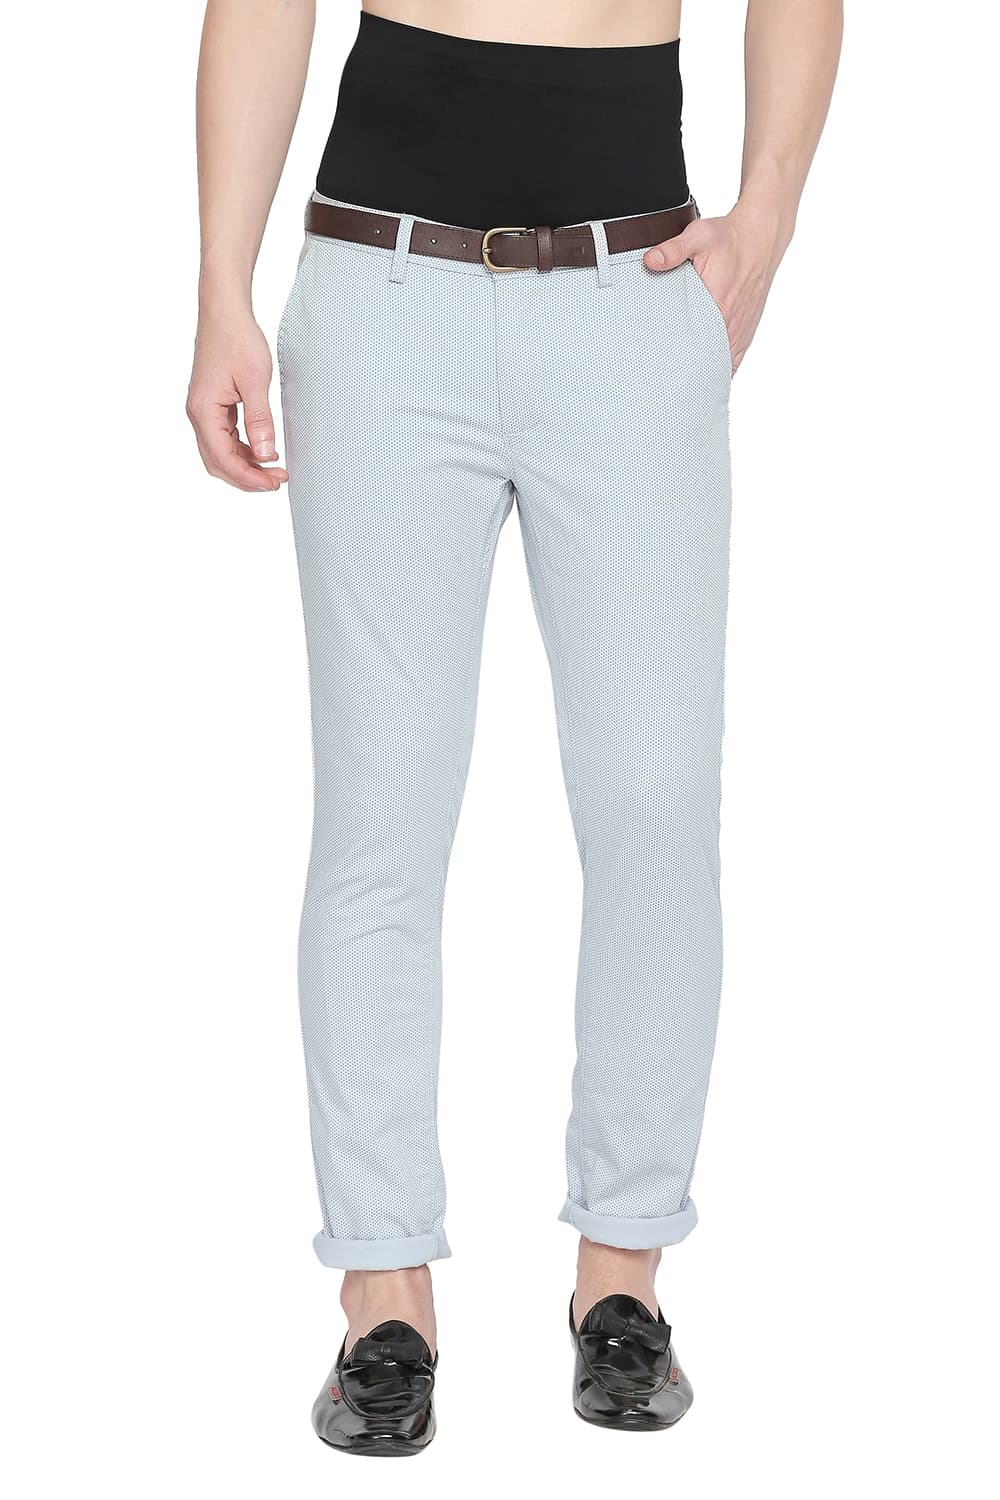 BASICS TAPERED FIT PRINTED STRETCH TROUSER WITH BELT